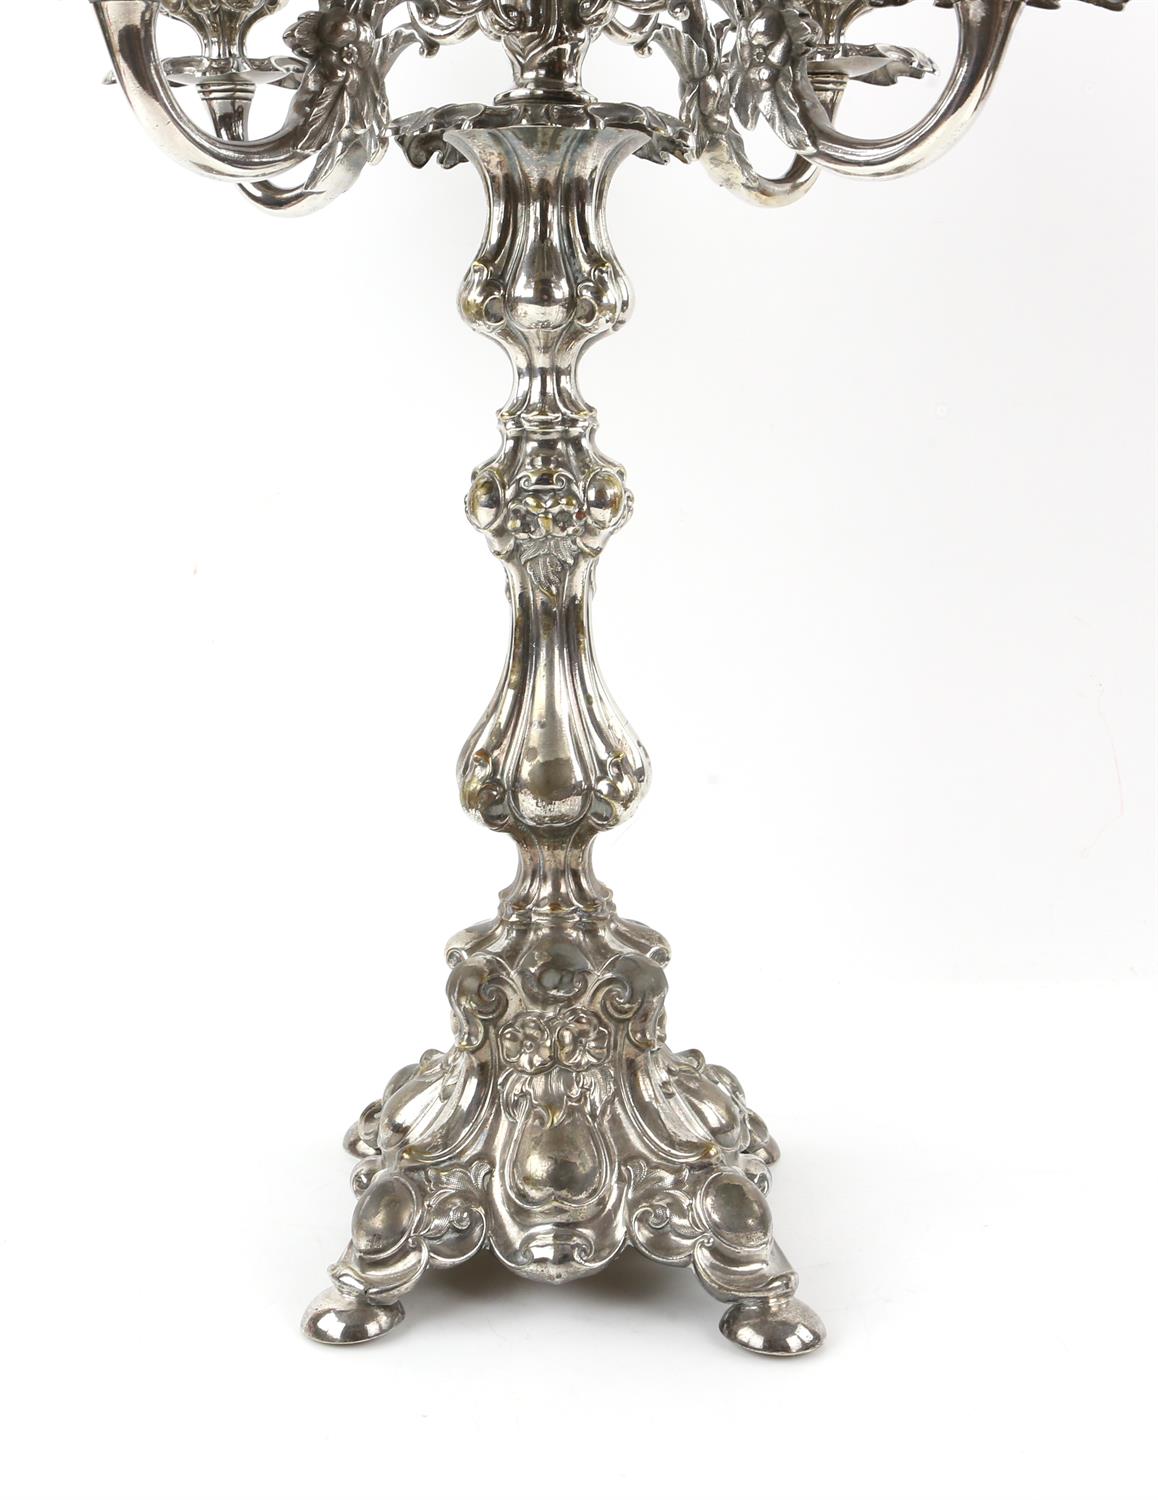 Pair of German silver plated five-light candelabra by Henniger, on waisted columns, - Image 7 of 11